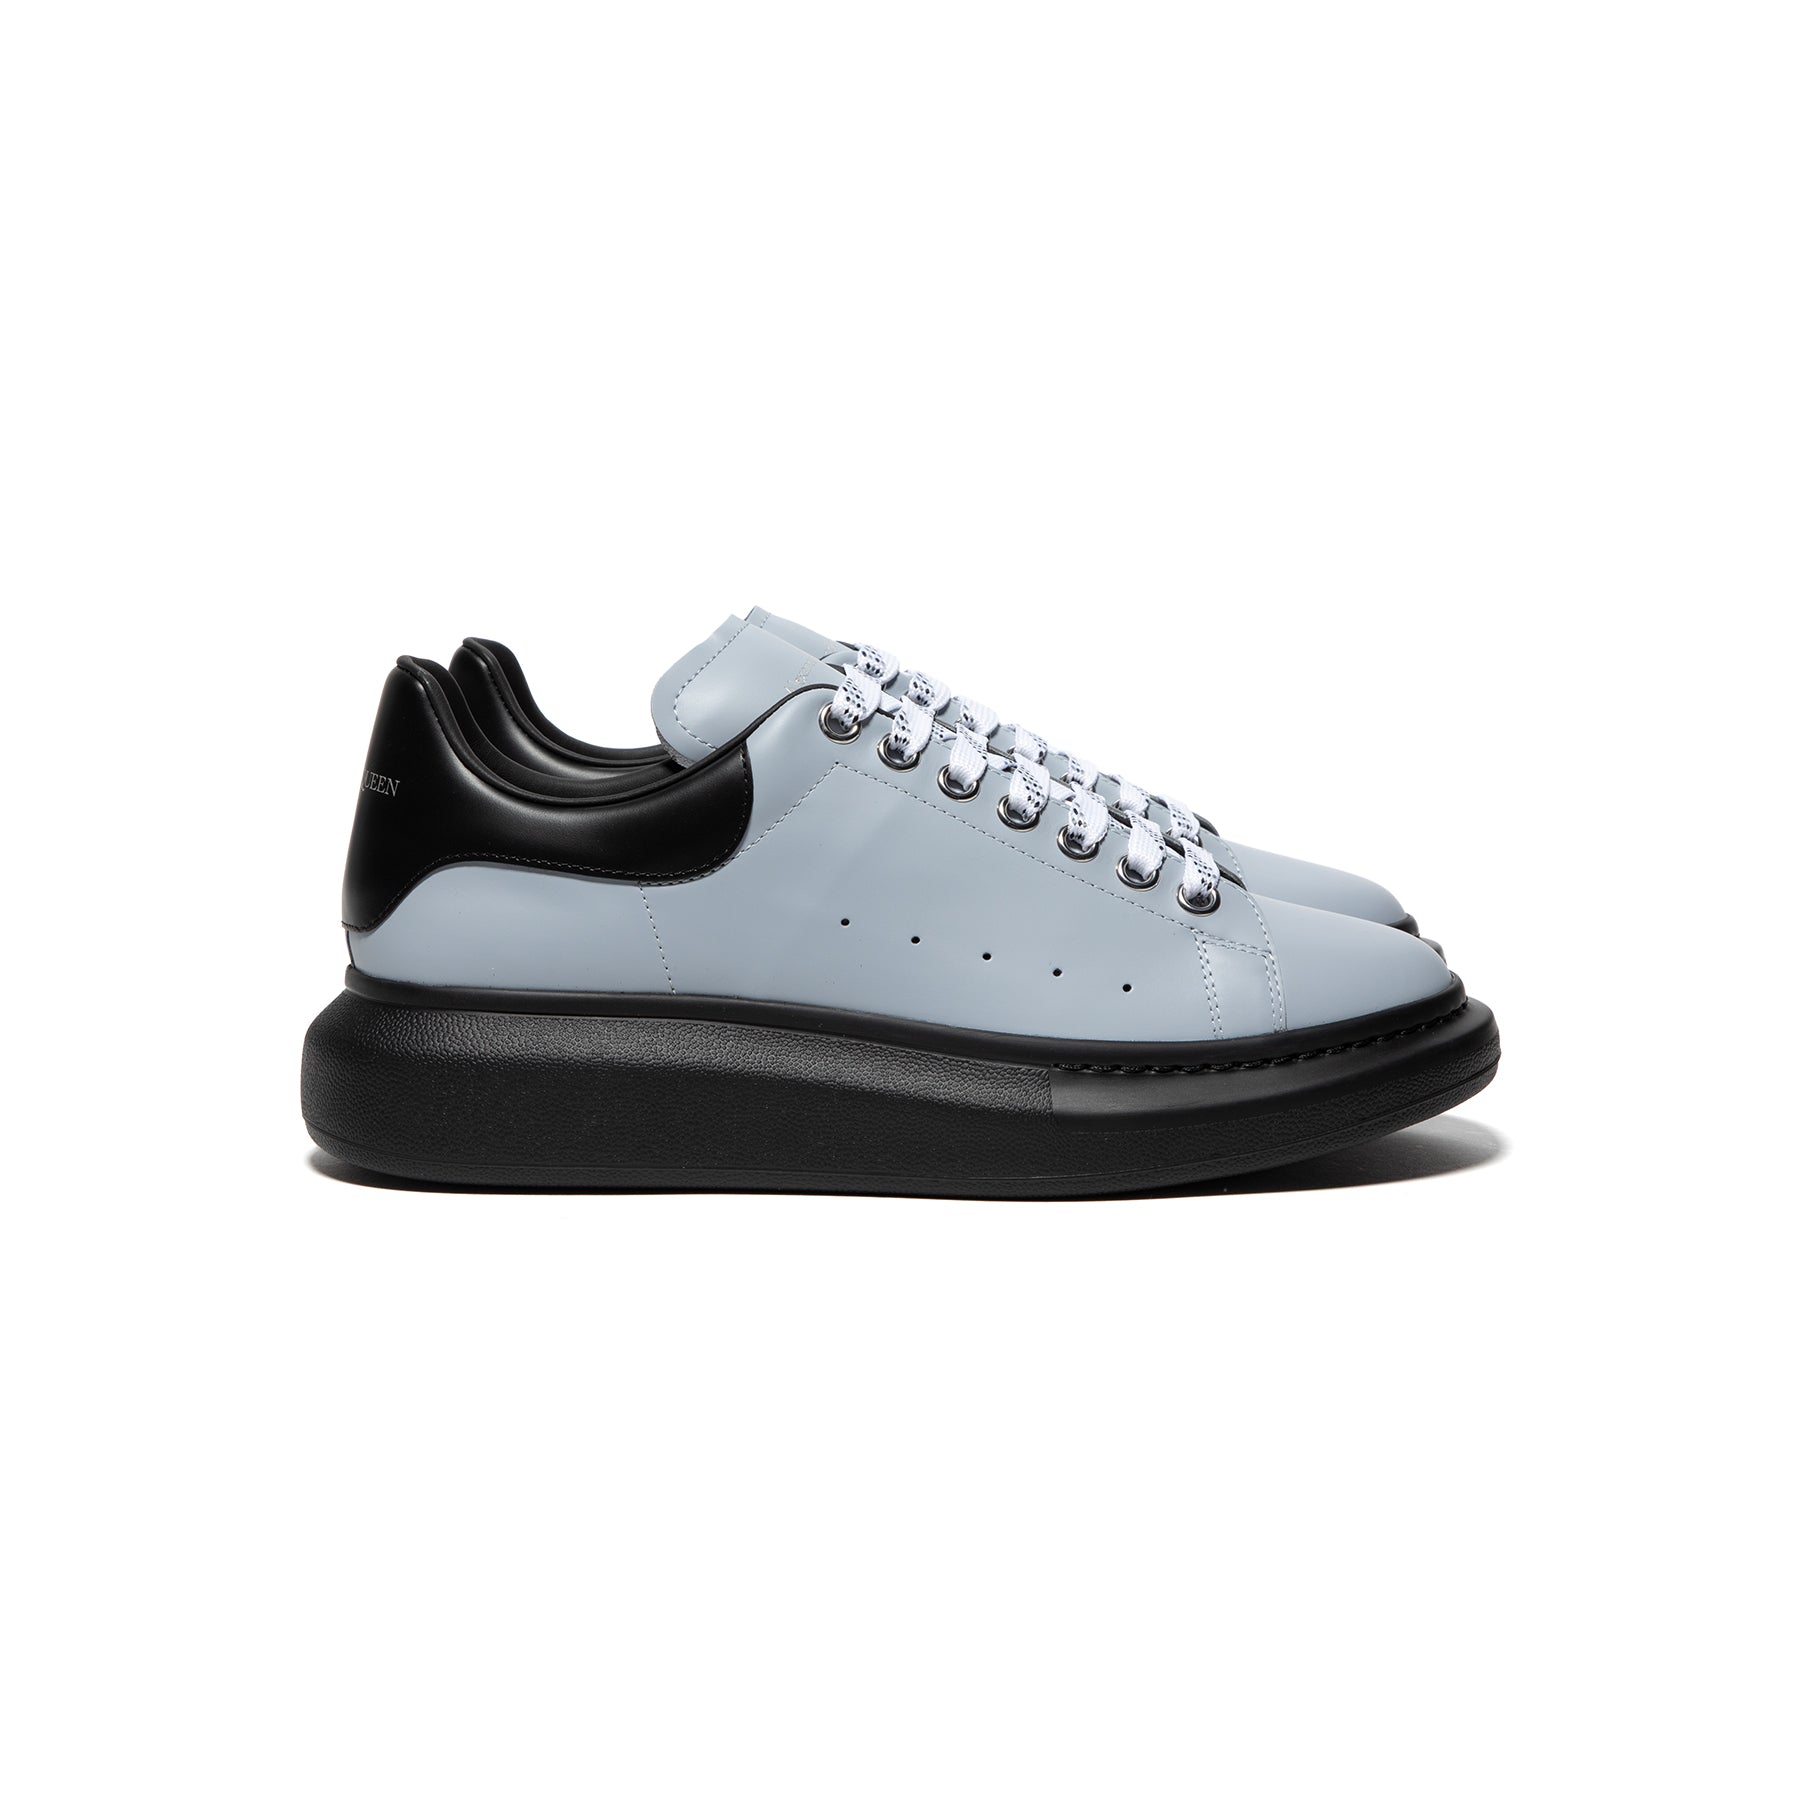 Alexander McQueen Black Oversize Sneakers With White Sole for Men